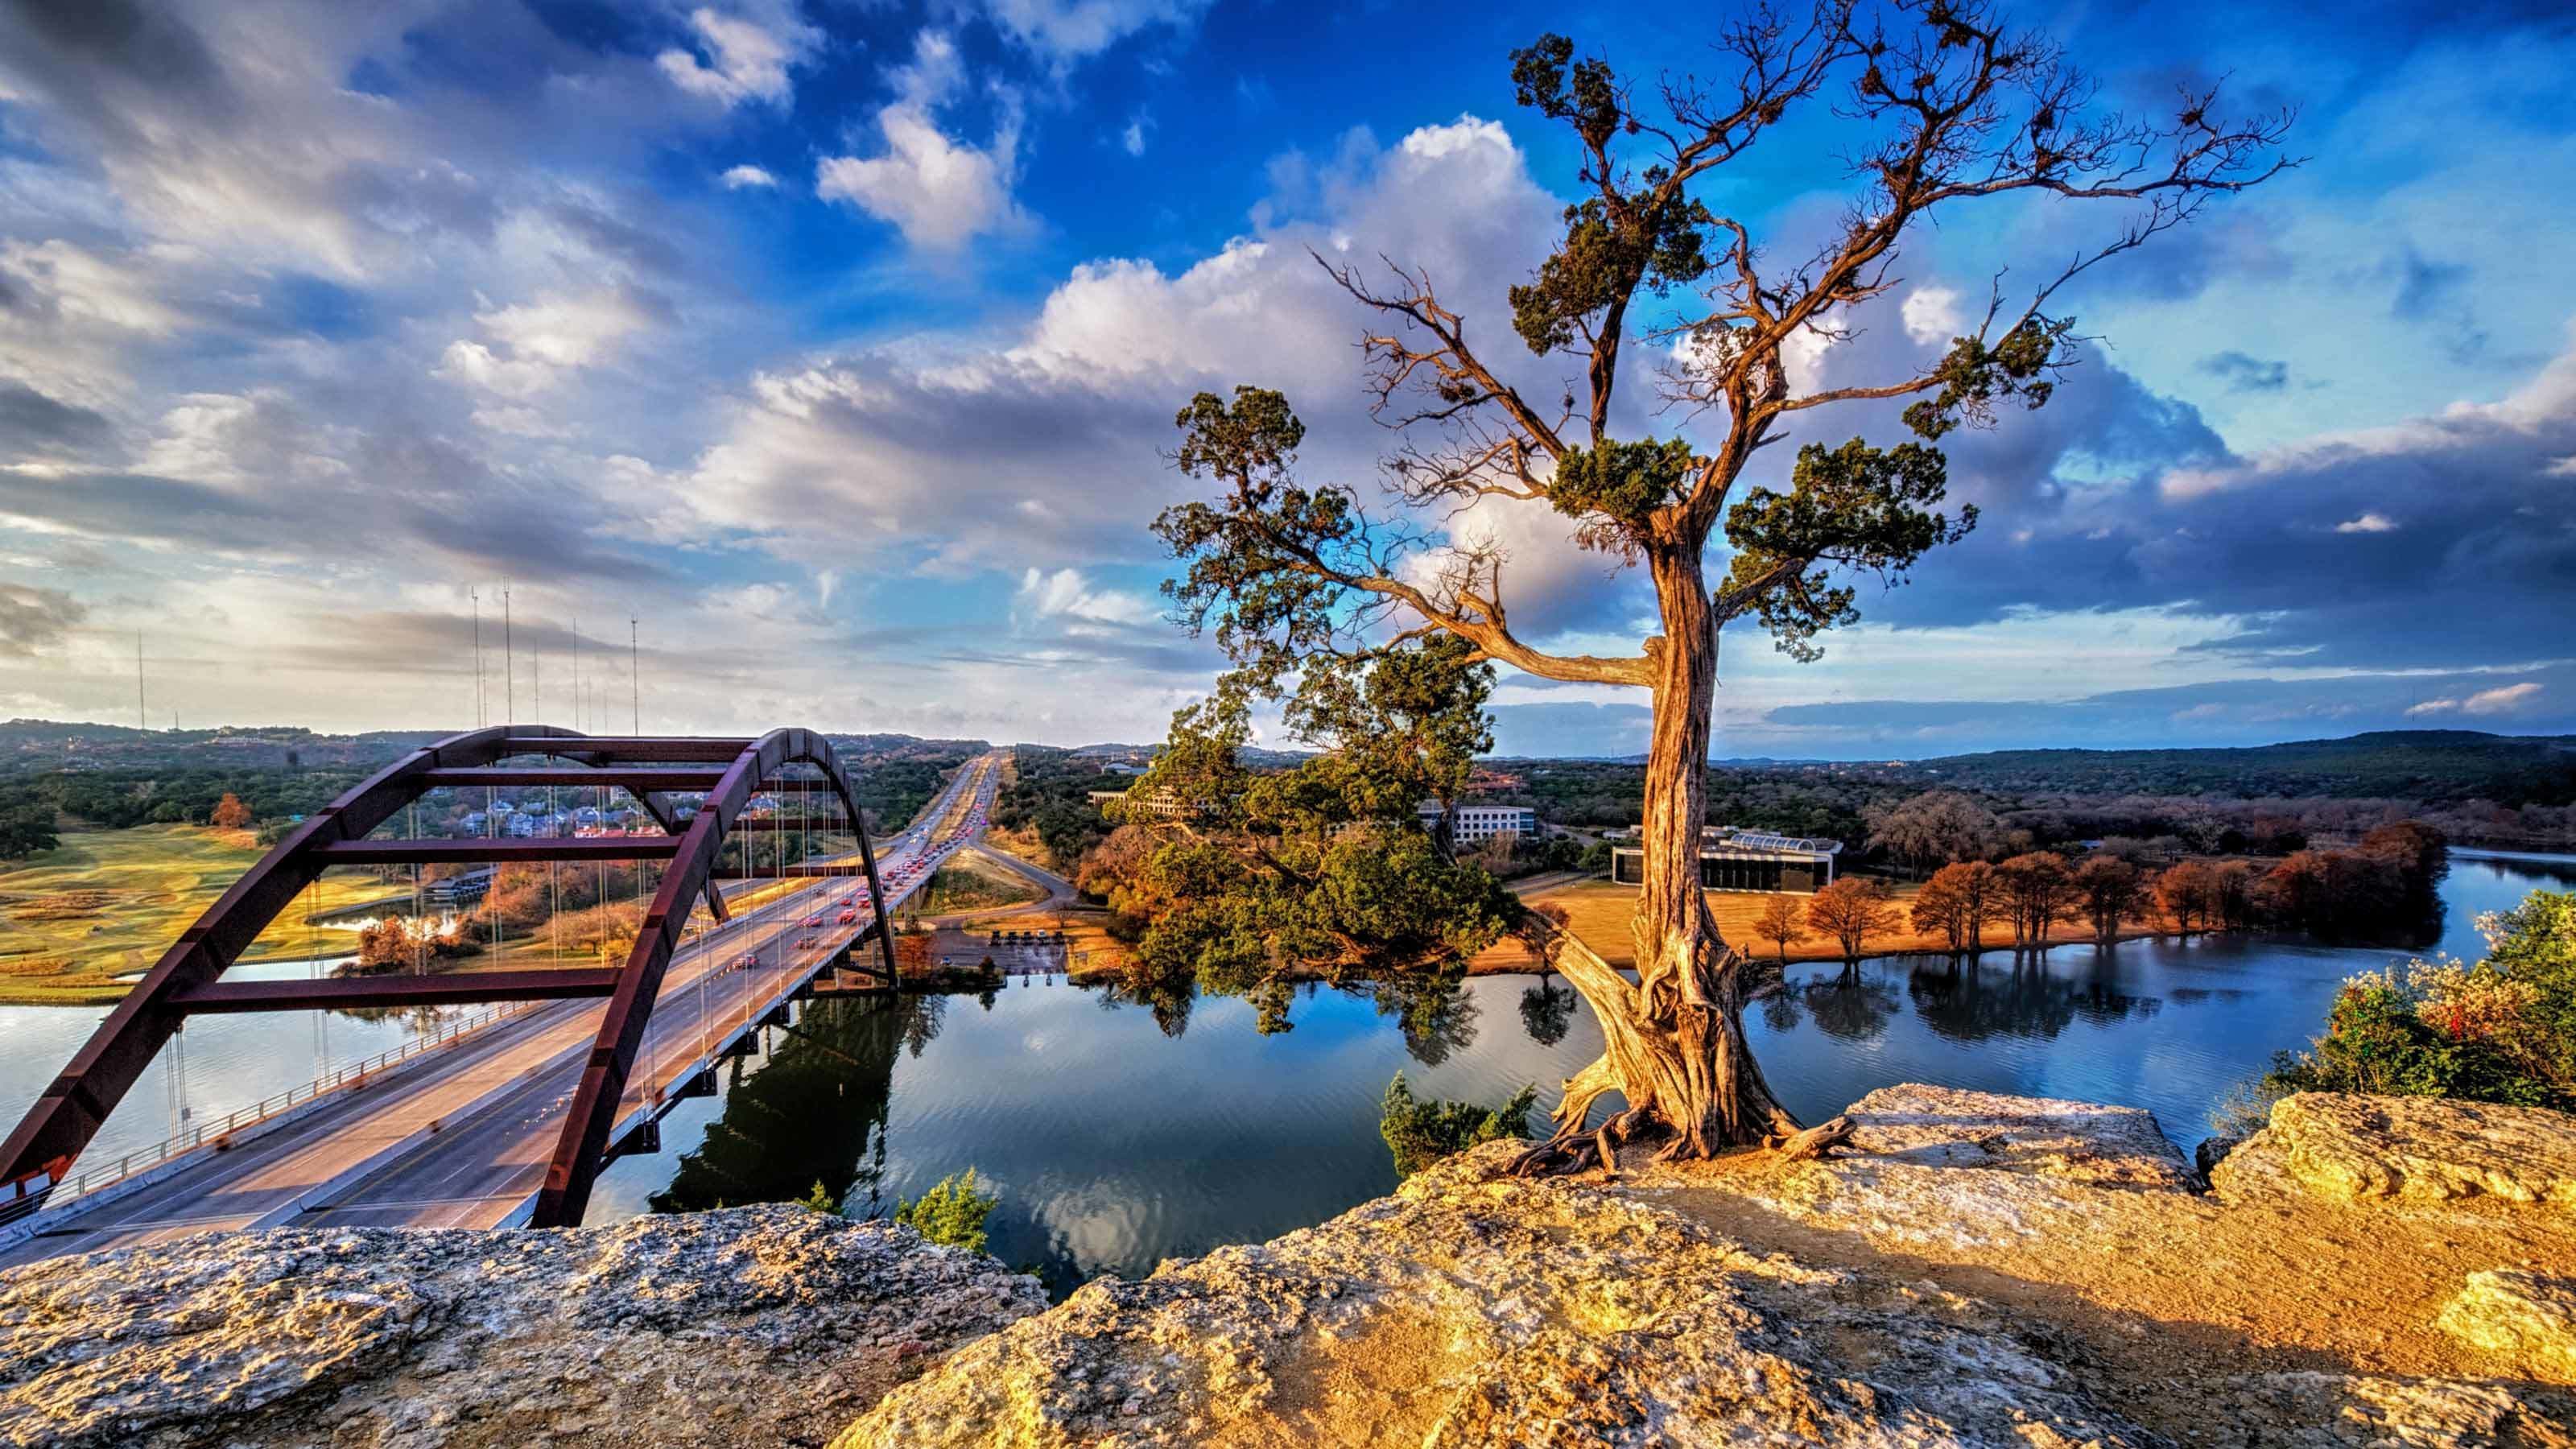 10 TOP Things to Do in Marble Falls (2020 Attraction & Activity Guide